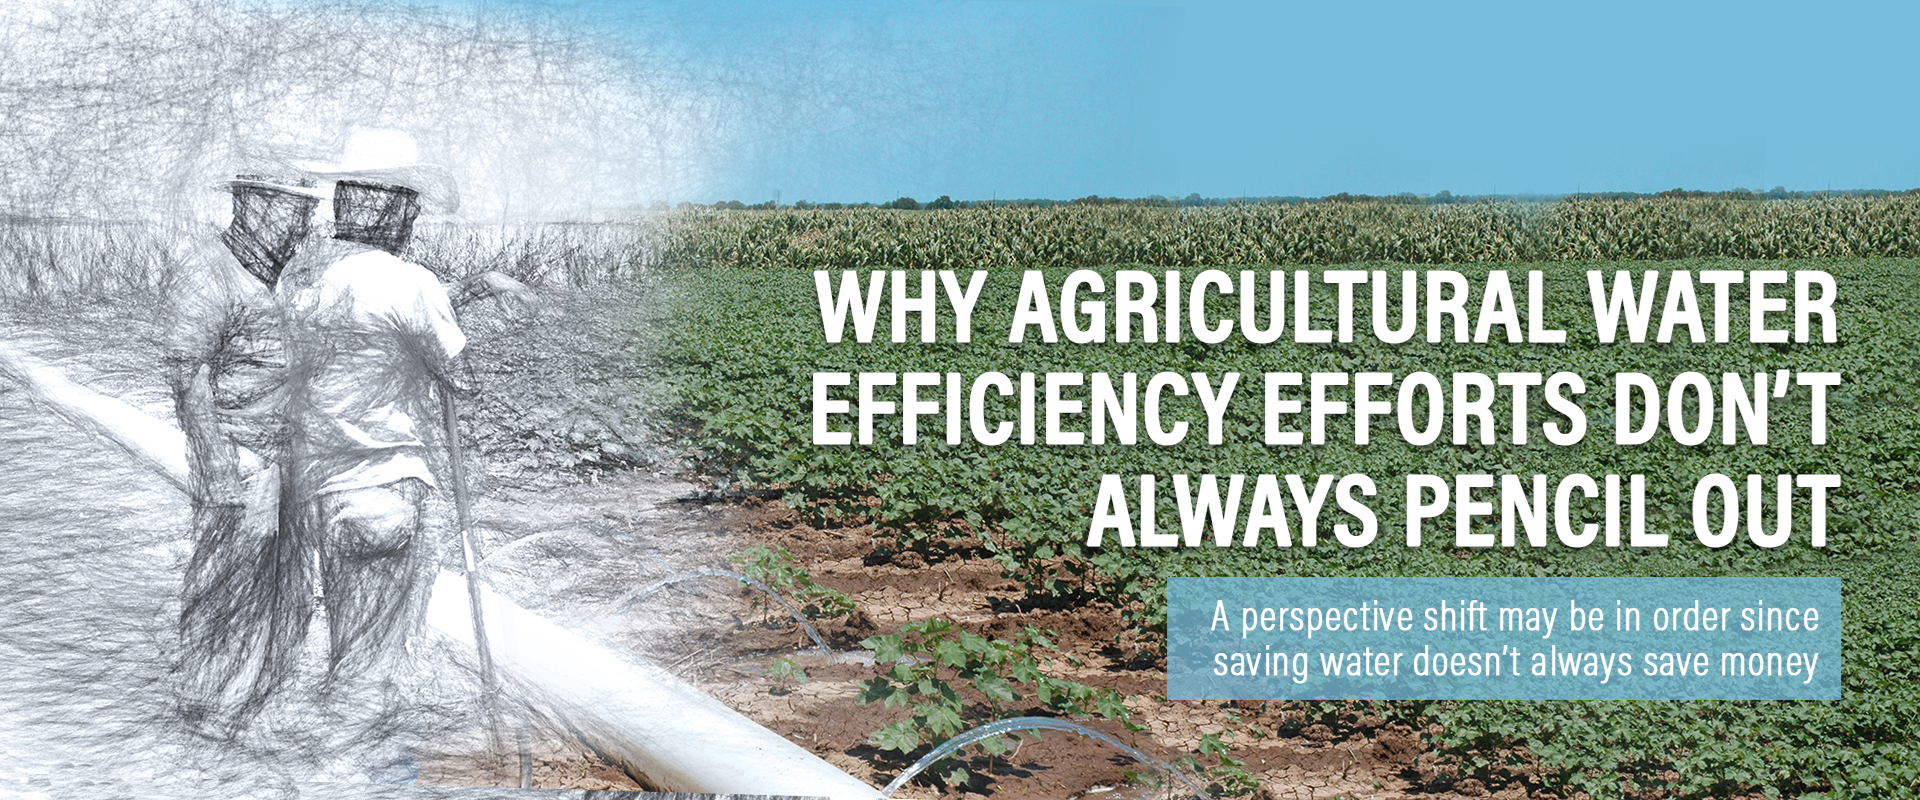 Why Agricultural Water Efficiency Efforts Don’t Always Pencil Out